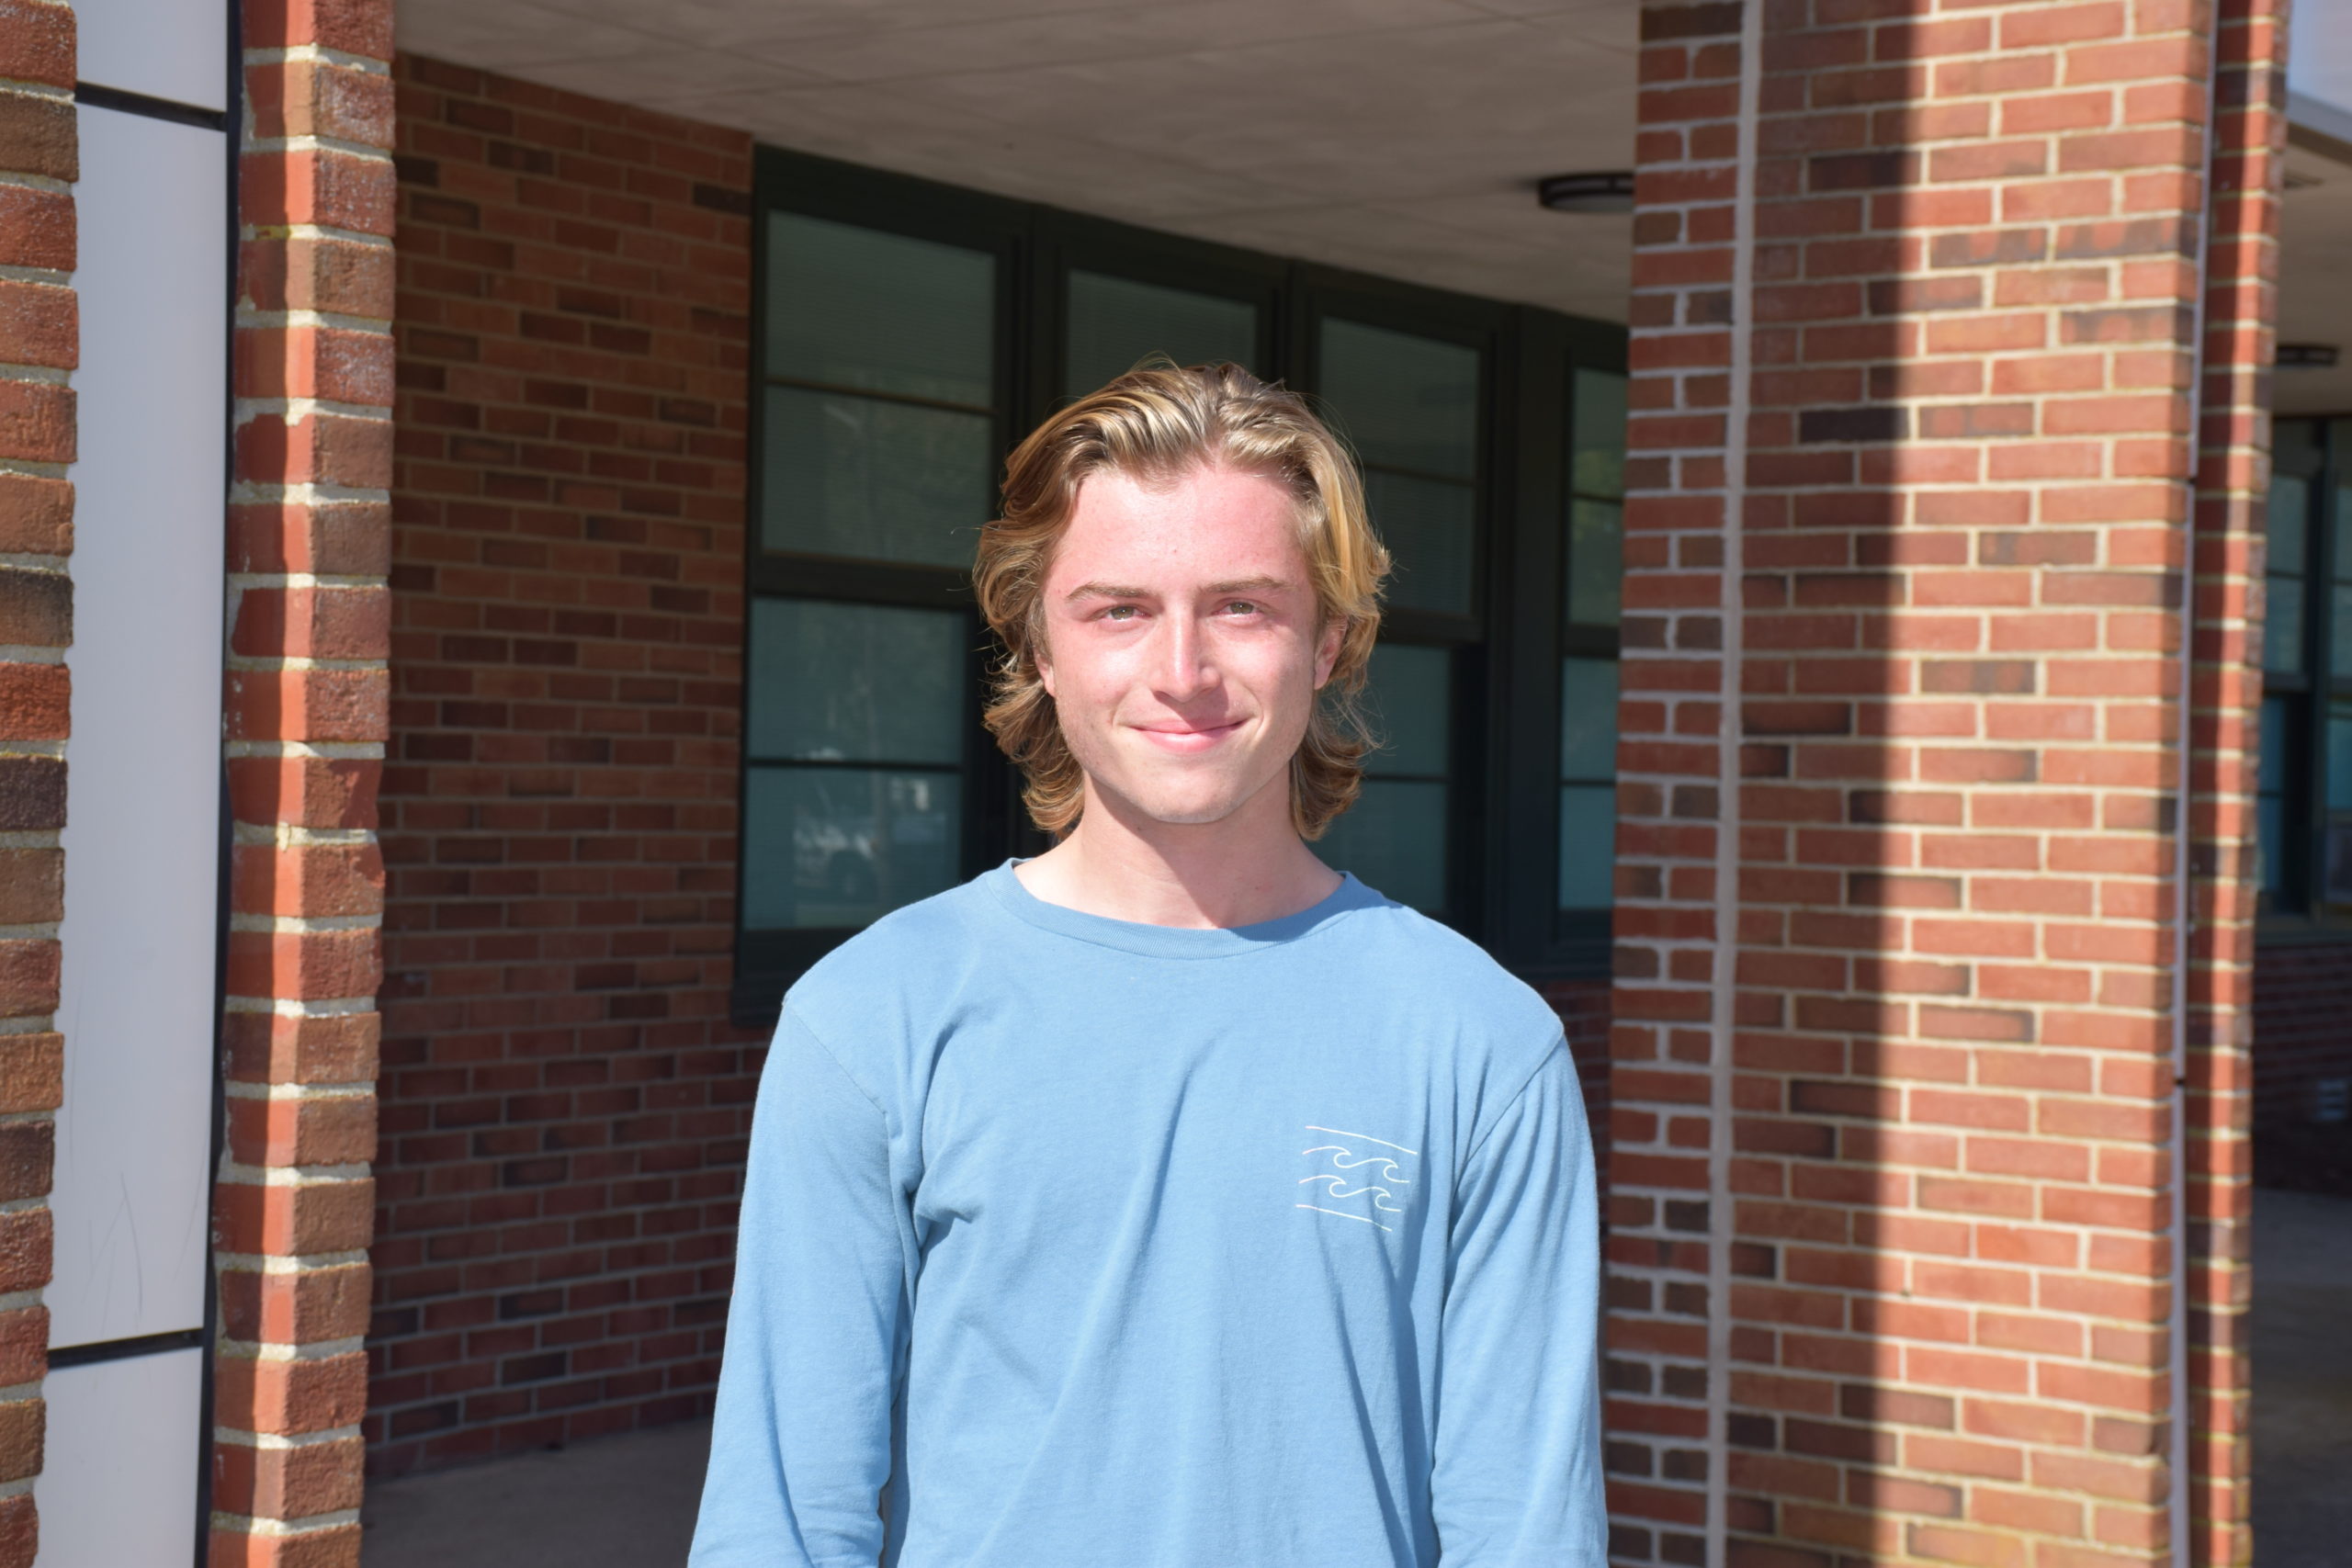 Westhampton Beach High School junior Jack Schultz has earned an opportunity to work with scientists at Brookhaven National Laboratory.